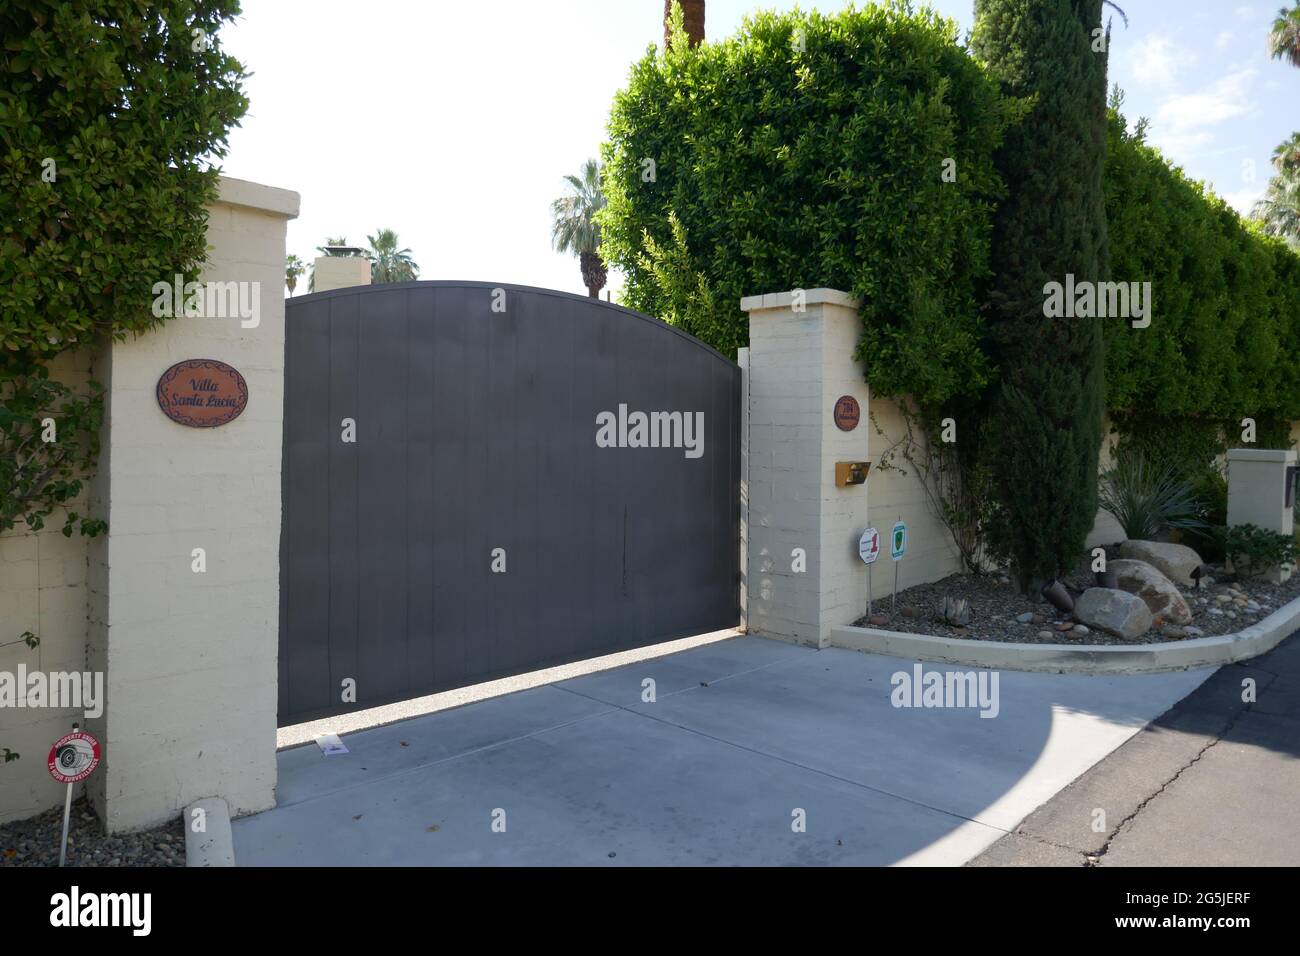 Palm Springs, California, USA 24th June 2021 A general view of atmosphere of actress Bette Davis Former home/house, Villa Santa Lucia at 784 N. Patencio Road on June 24, 2021 in Palm Springs, California, USA. Photo by Barry King/Alamy Stock Photo Stock Photo